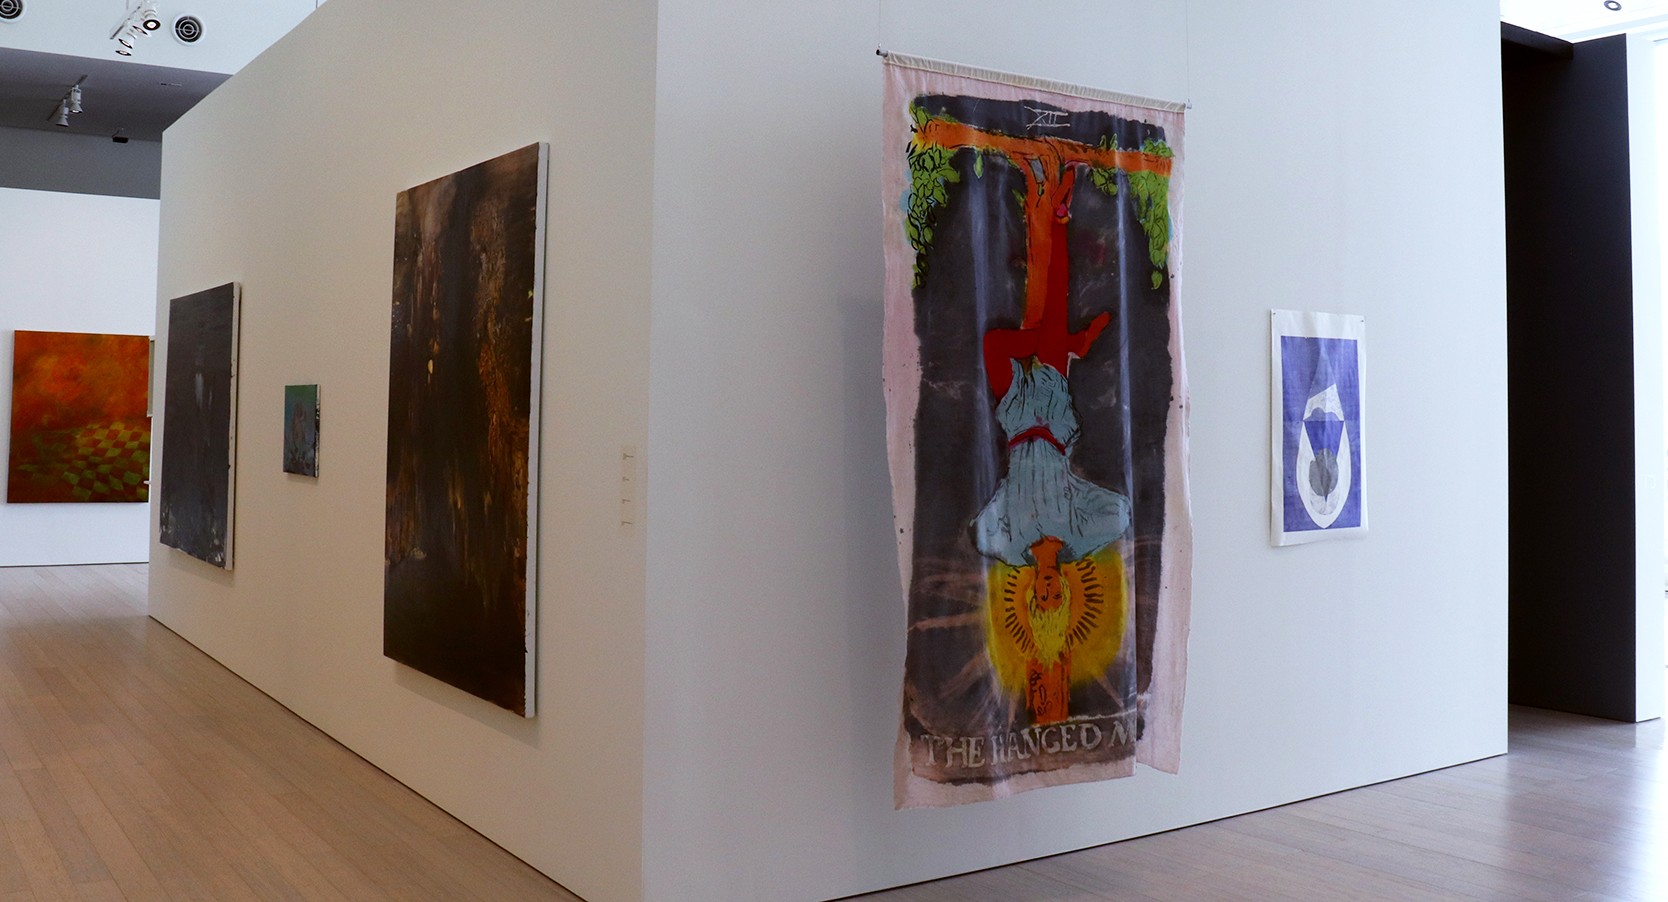 Installation view of the 6th floor 2019 MFA Thesis Exhibition, on view at the Wallach Art Gallery, Columbia University April 27 – May 26, 2019. Photograph by Eddie José Bartolomei. Courtesy the Wallach Art Gallery.